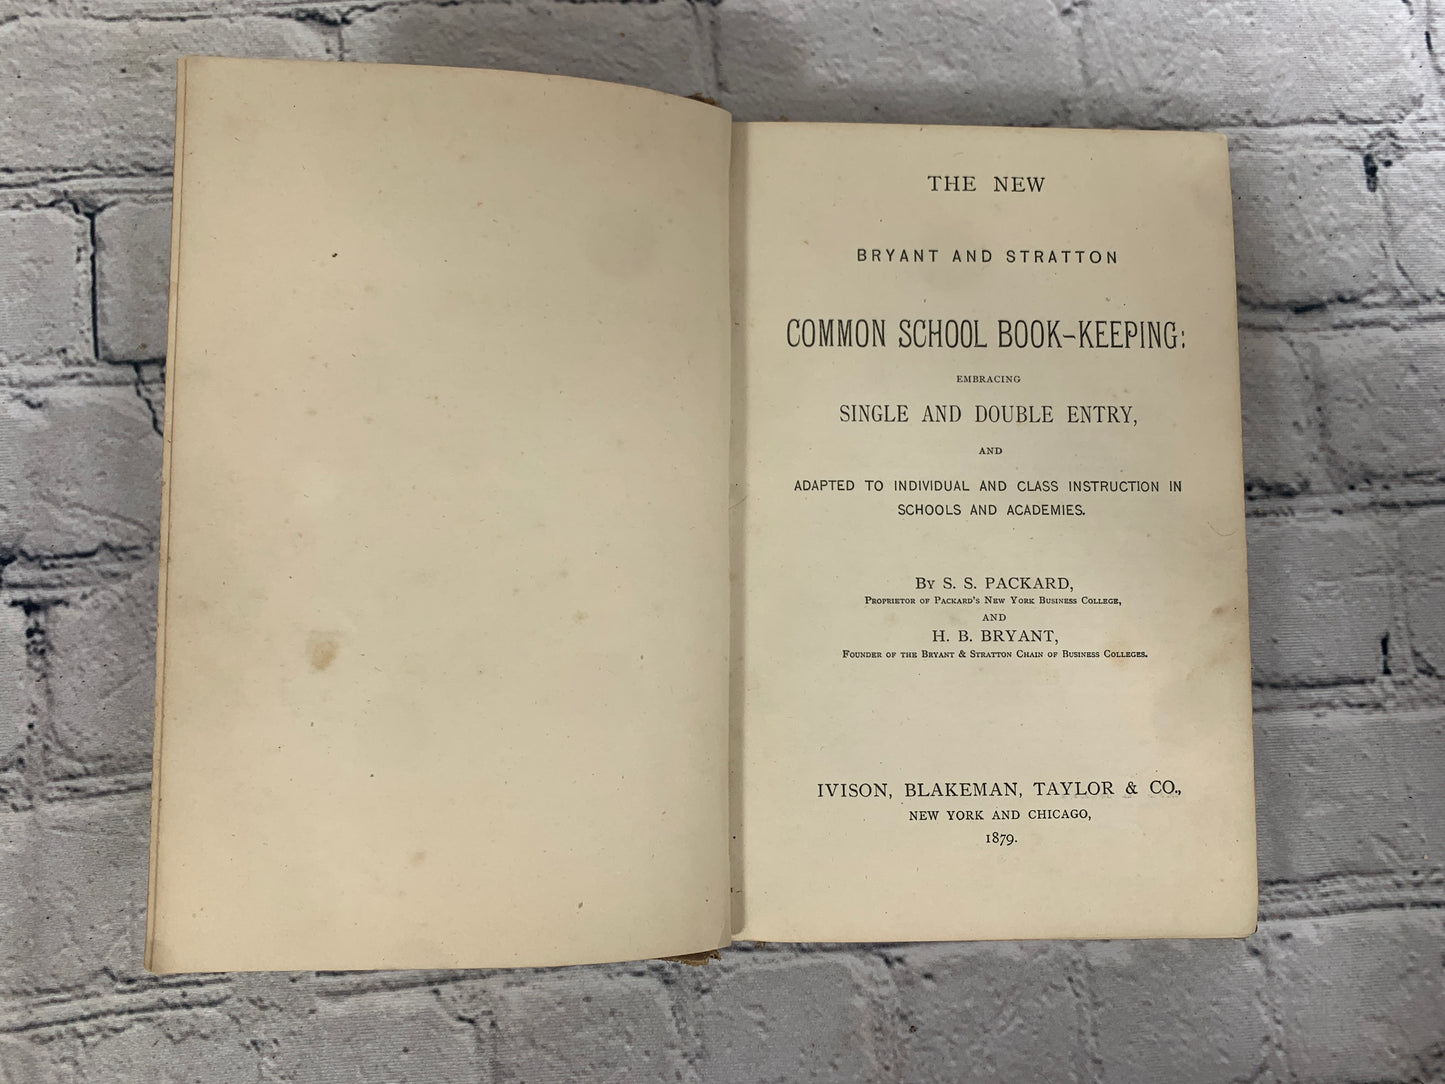 The New Bryant and Stratton Common School Book-Keeping [1879]